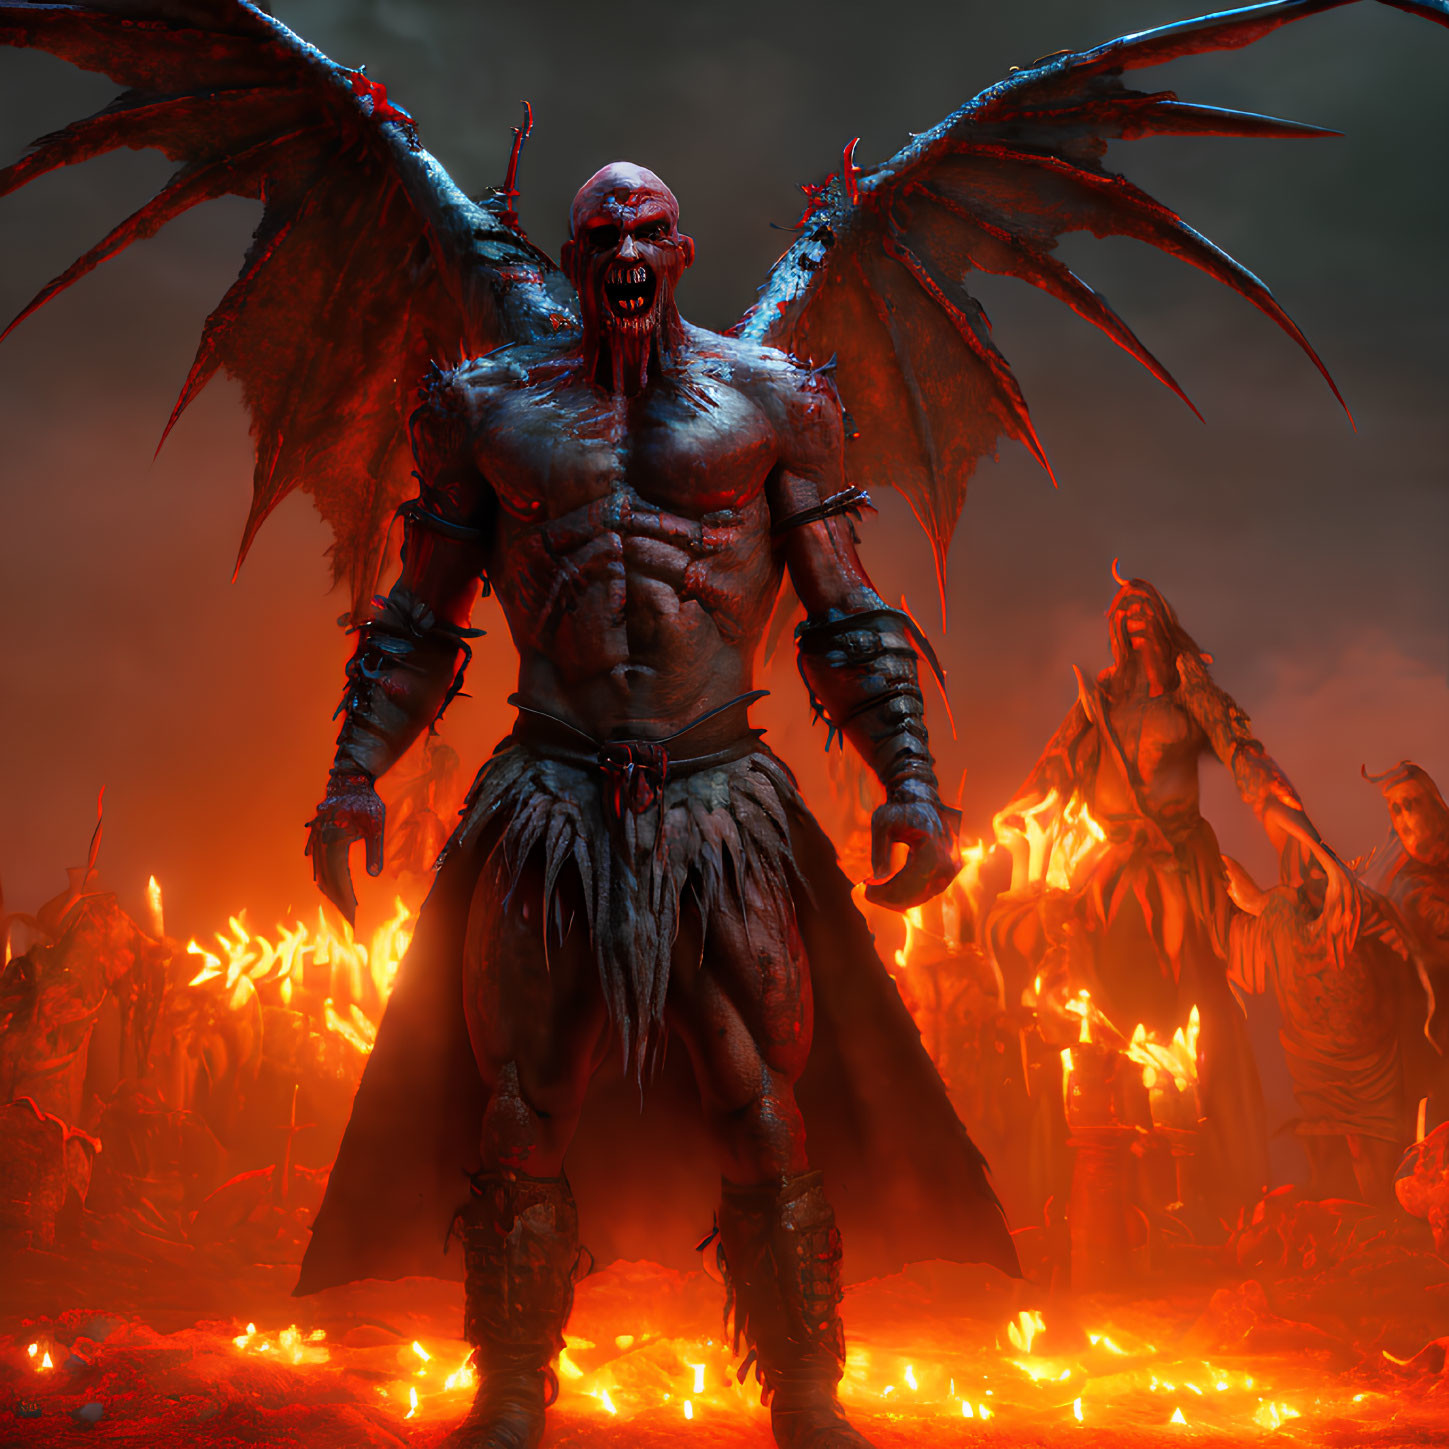 Menacing winged demon with red eyes in fiery hellish landscape